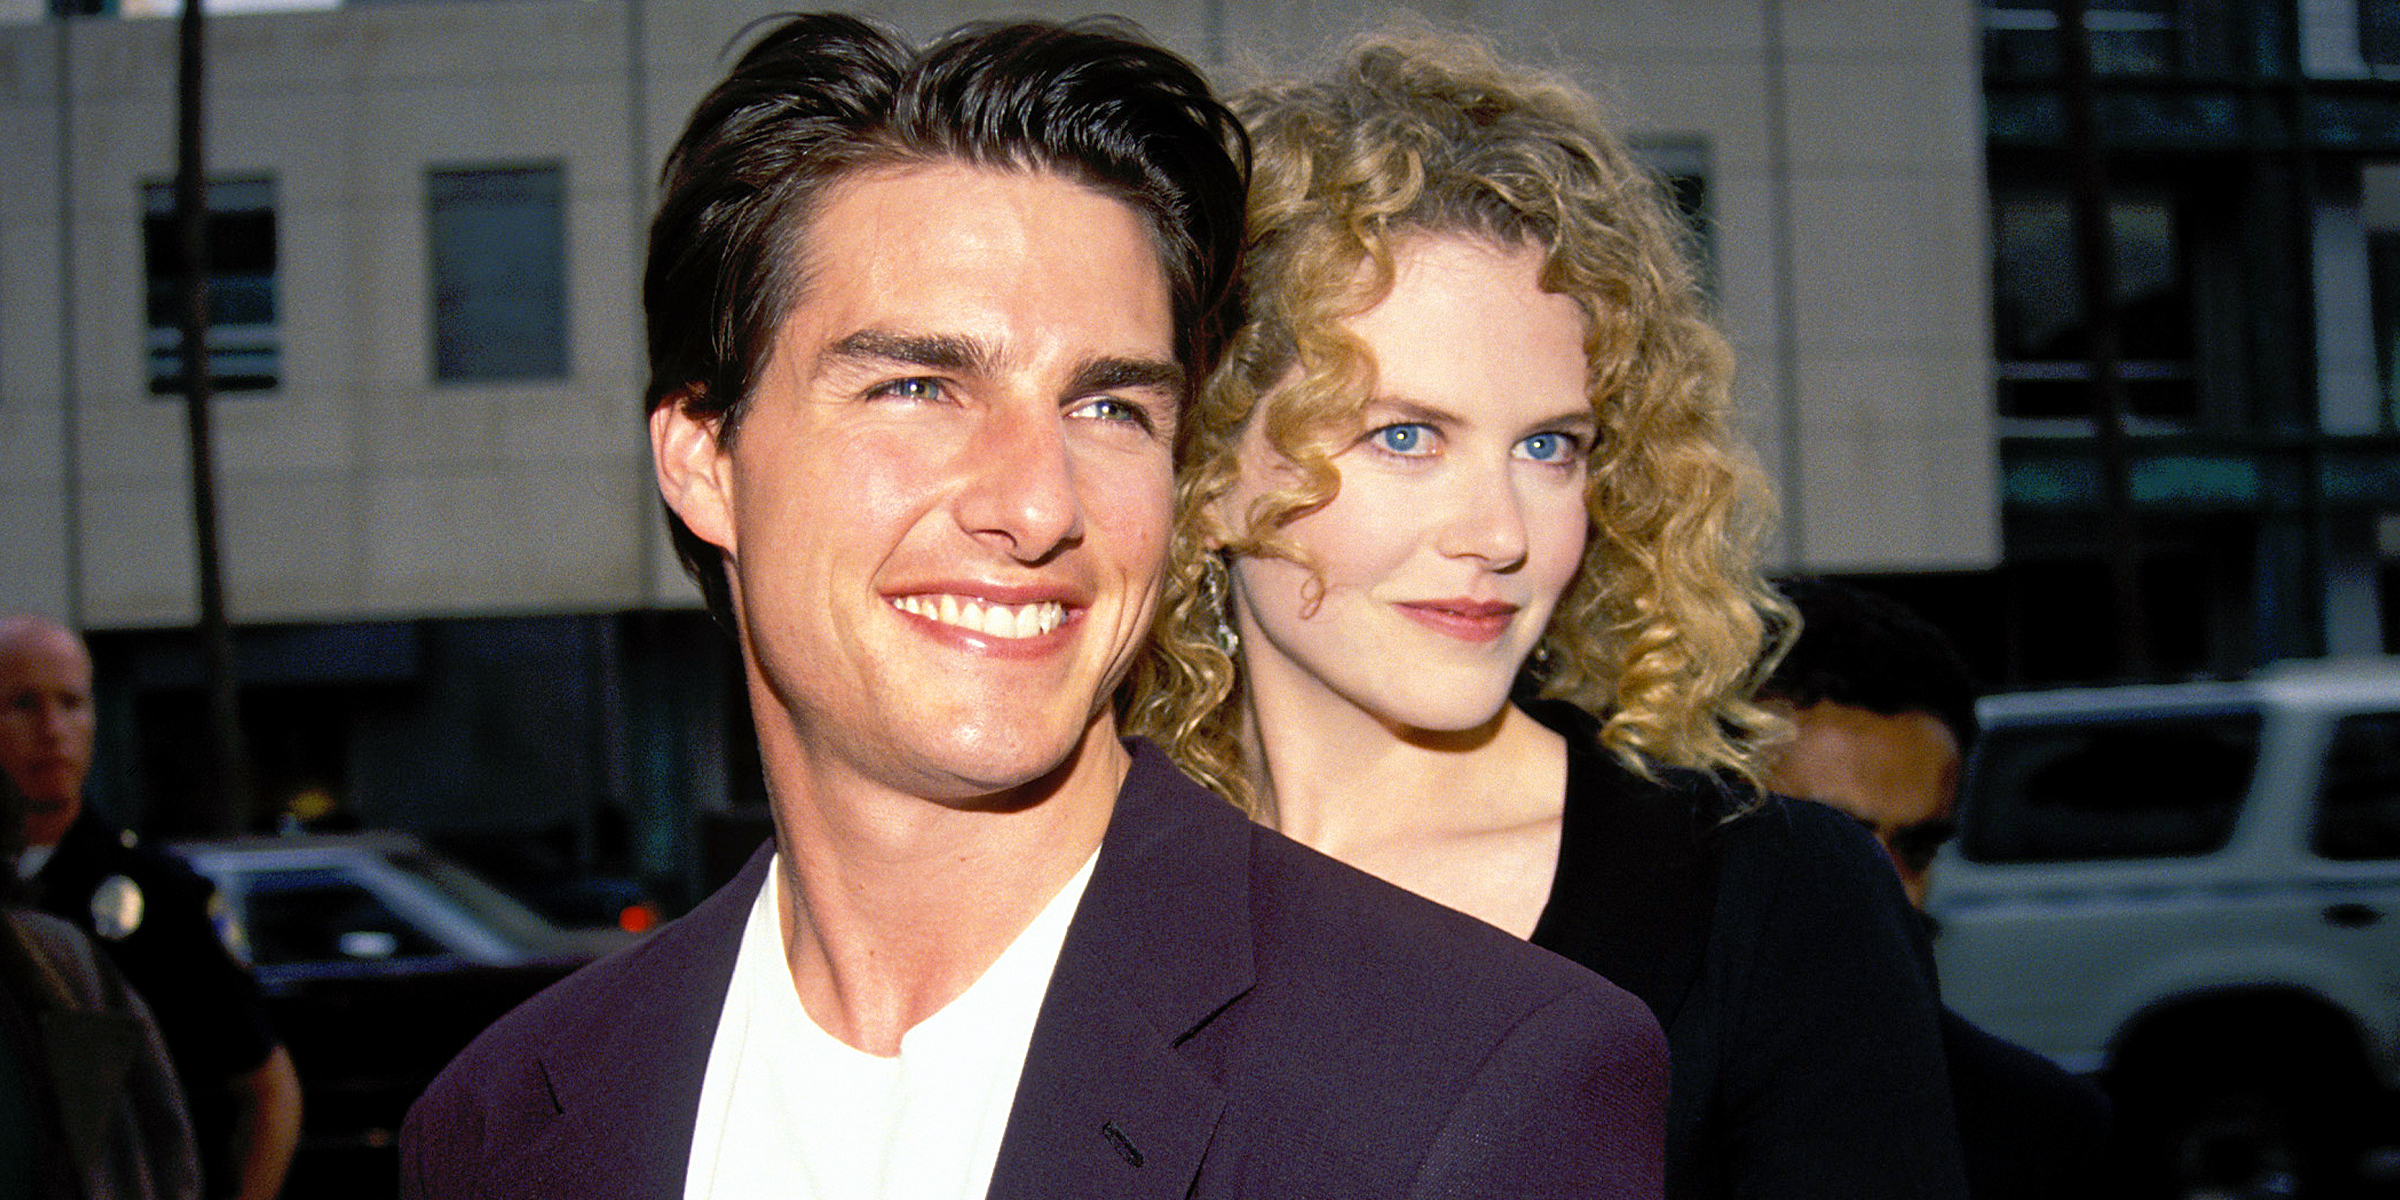 Nicole Kidman and Tom Cruise | Source: Getty Images